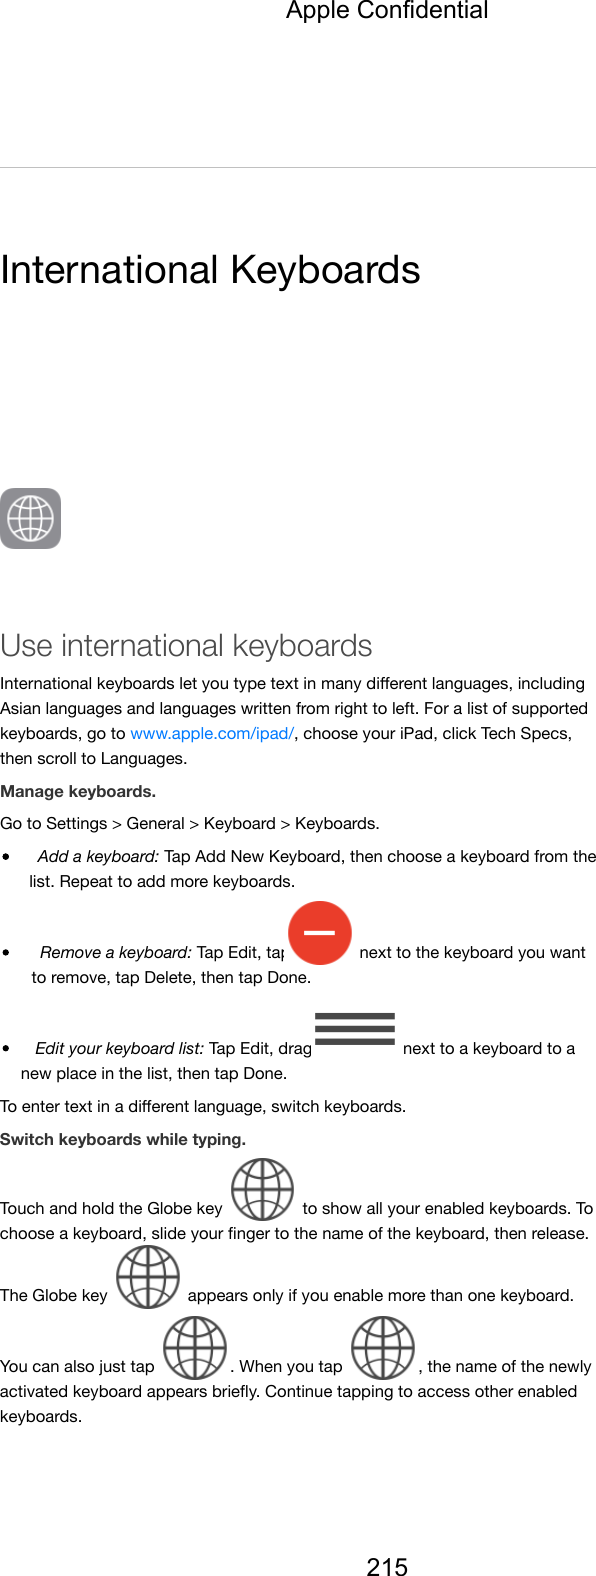 International KeyboardsUse international keyboardsInternational keyboards let you type text in many diﬀerent languages, includingAsian languages and languages written from right to left. For a list of supportedkeyboards, go to www.apple.com/ipad/, choose your iPad, click Tech Specs,then scroll to Languages.Manage keyboards.Go to Settings &gt; General &gt; Keyboard &gt; Keyboards.Add a keyboard: Tap Add New Keyboard, then choose a keyboard from thelist. Repeat to add more keyboards.Remove a keyboard: Tap Edit, tap   next to the keyboard you wantto remove, tap Delete, then tap Done.Edit your keyboard list: Tap Edit, drag   next to a keyboard to anew place in the list, then tap Done.To enter text in a diﬀerent language, switch keyboards.Switch keyboards while typing.Touch and hold the Globe key   to show all your enabled keyboards. Tochoose a keyboard, slide your ﬁnger to the name of the keyboard, then release.The Globe key   appears only if you enable more than one keyboard.You can also just tap  . When you tap  , the name of the newlyactivated keyboard appears brieﬂy. Continue tapping to access other enabledkeyboards.Apple Confidential215